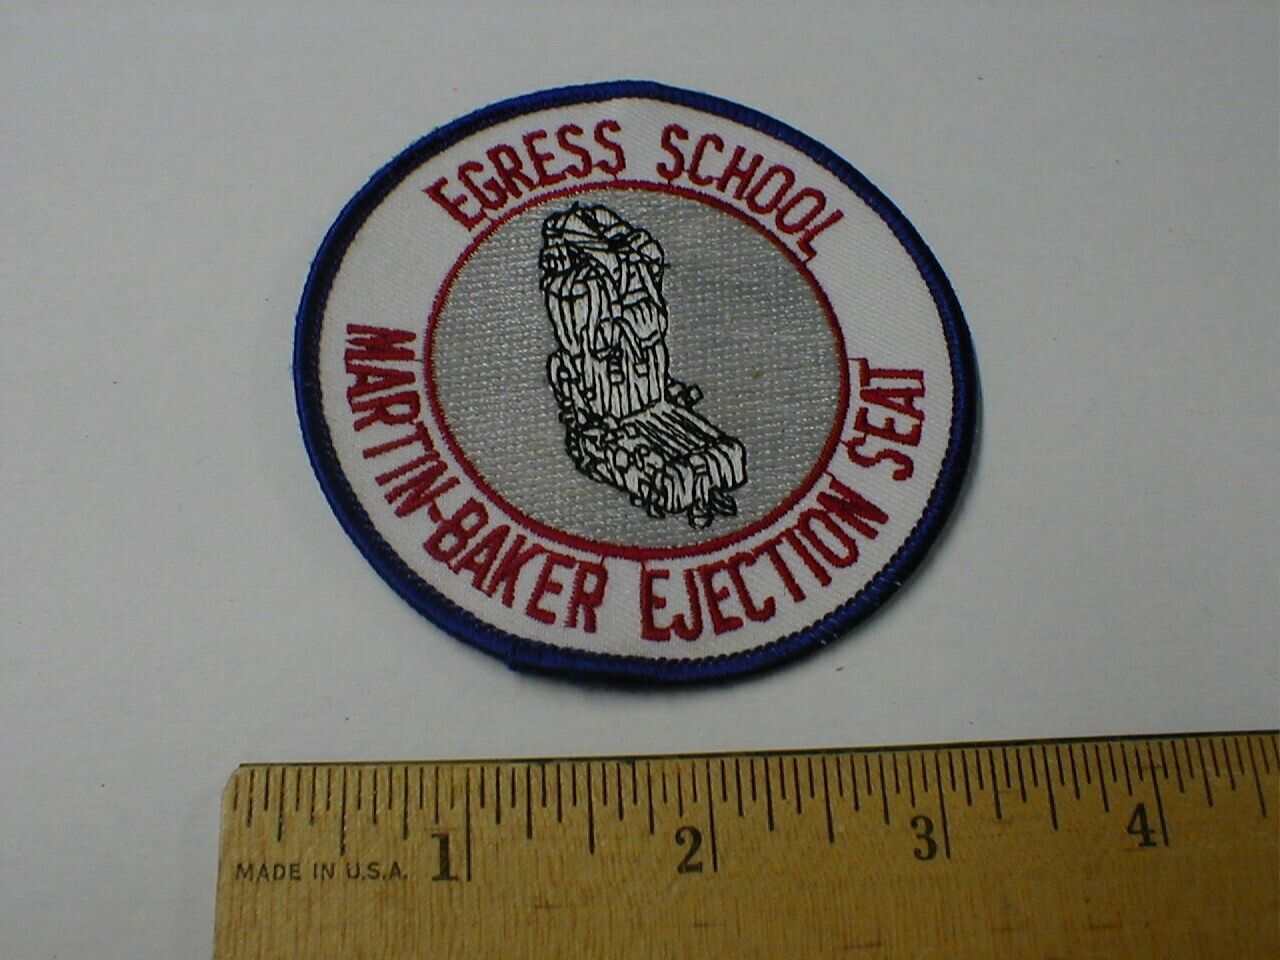 Egress School Martin-Baker Airplane Jet Ejection seat jacket hat patch NOS New